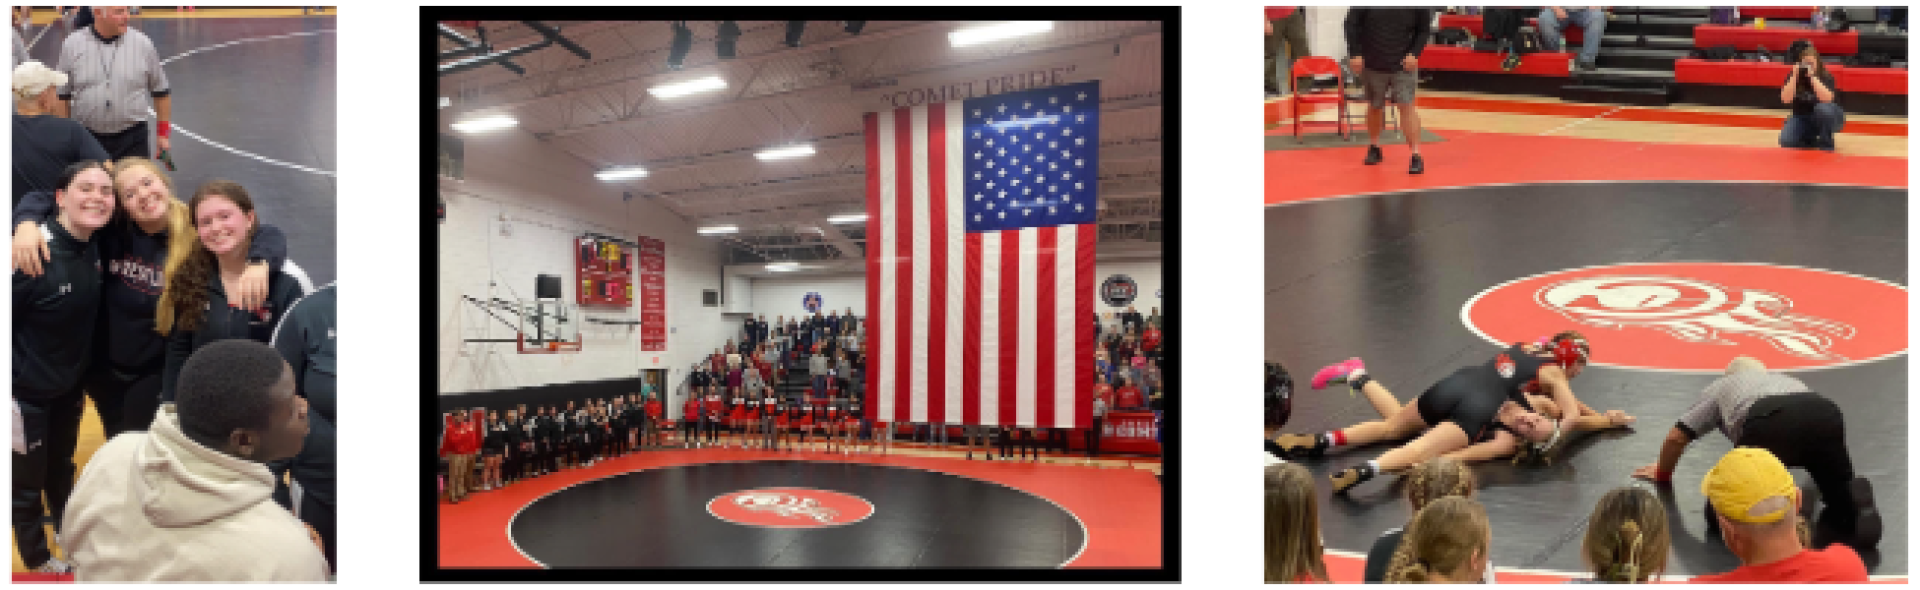 An image of three female wrestlers posing for the camera. An image of the girls wrestling team lined in the gym with a large flag hanging from the ceiling. An image of two female wrestlers competing with each other. 